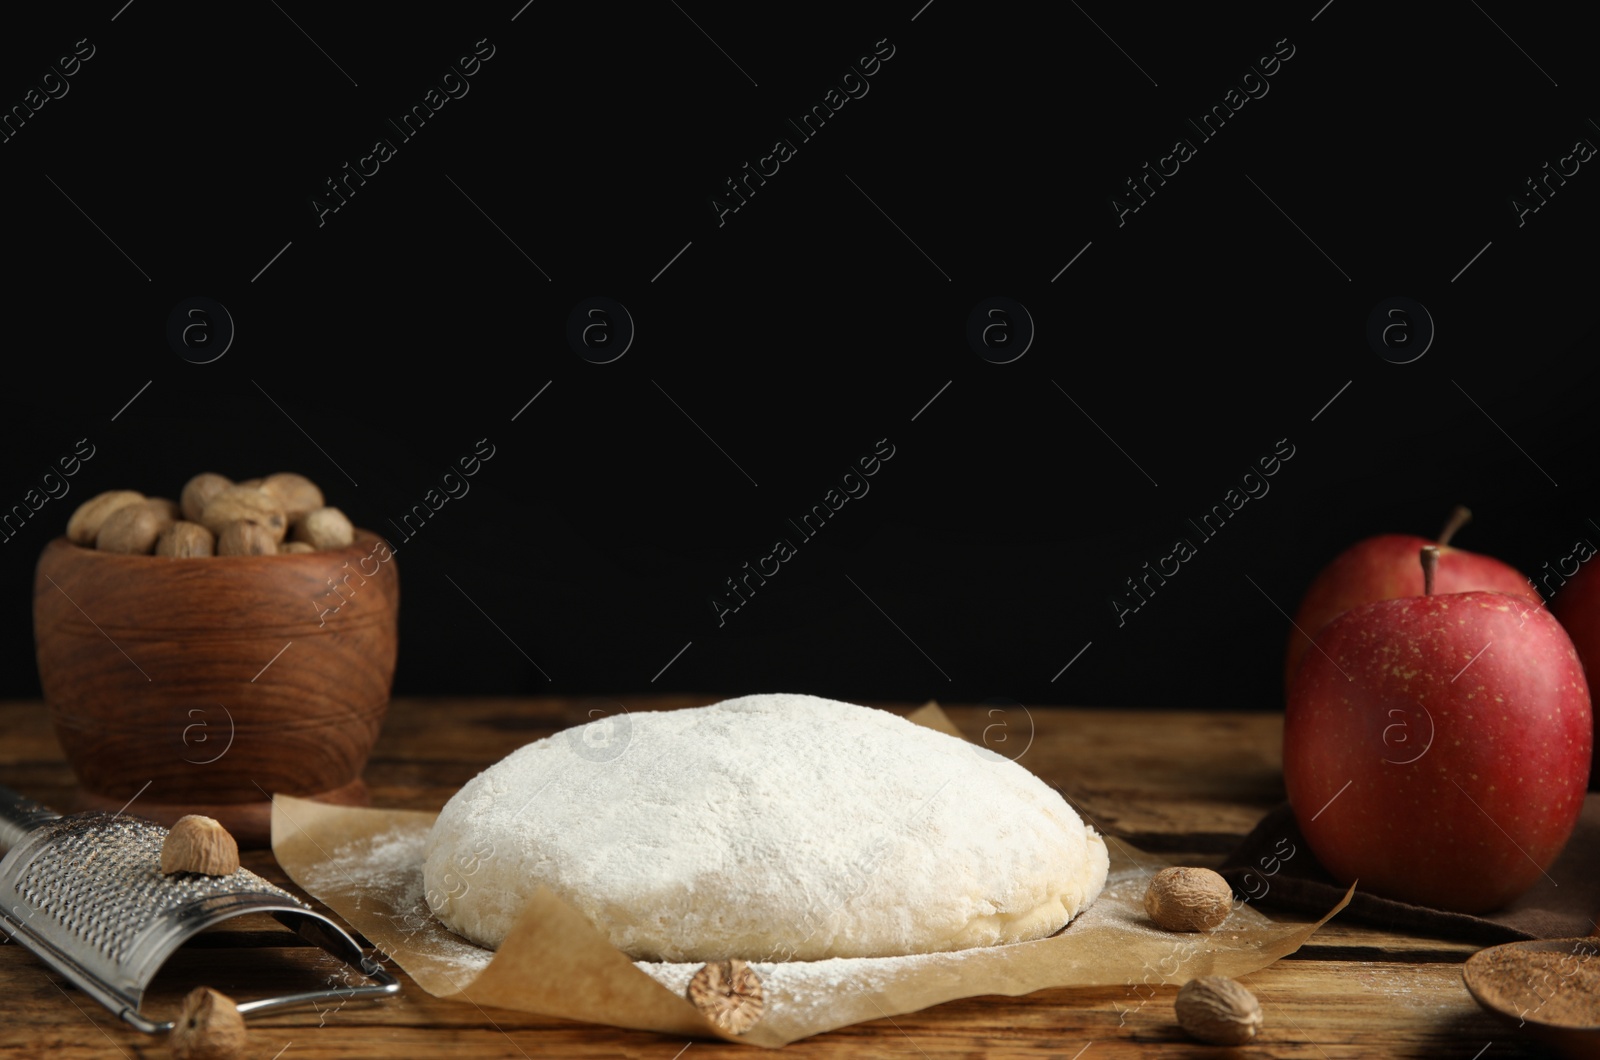 Photo of Raw dough, nutmeg seeds and apples on wooden table against black background, space for text